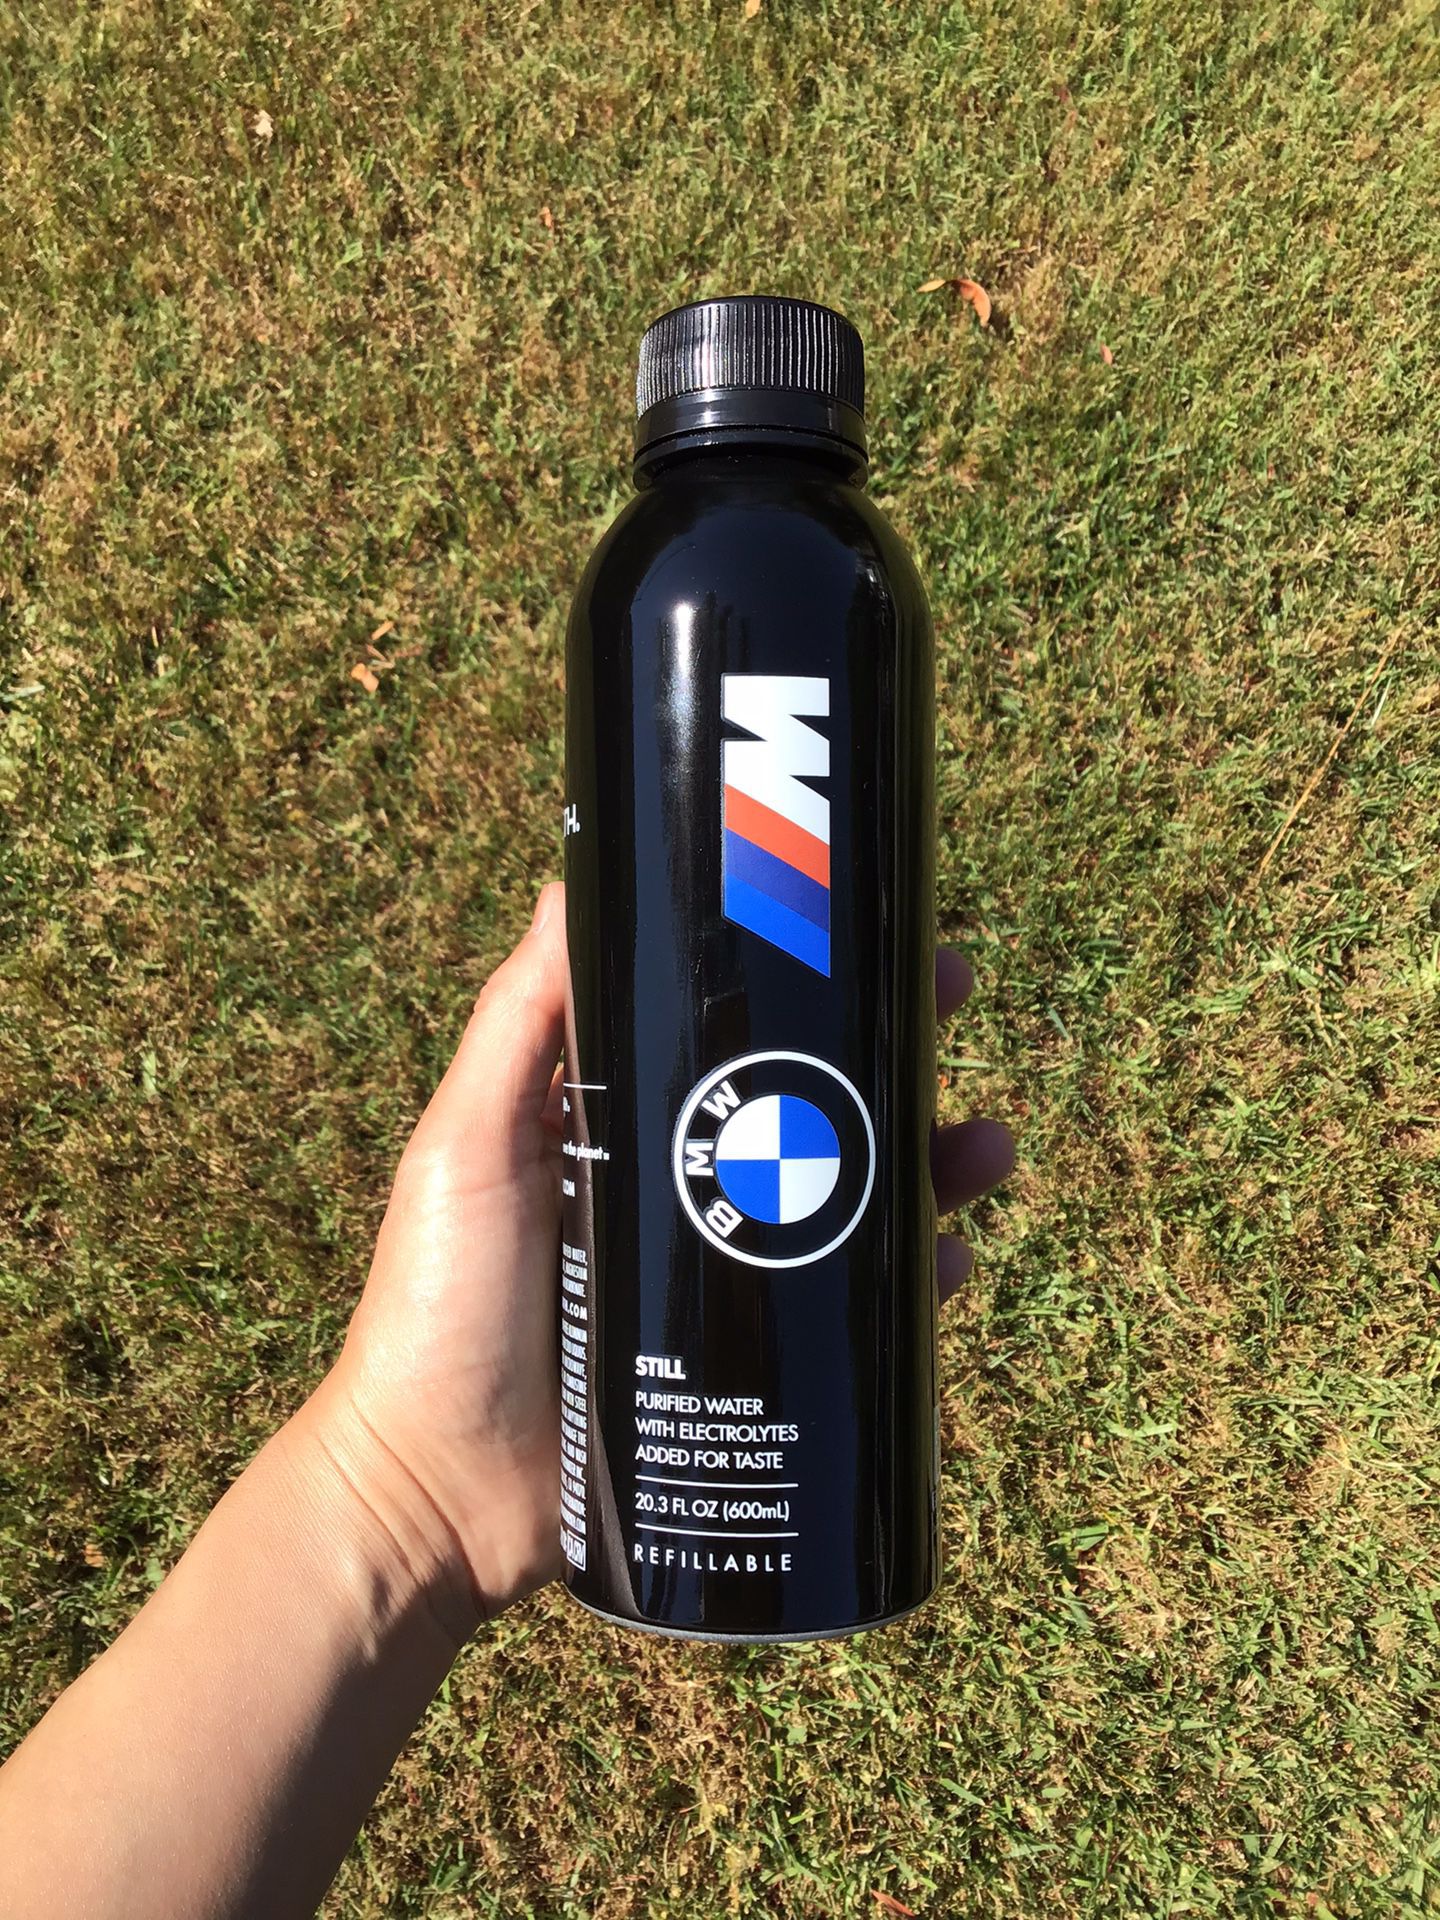 Black BMW Motorsport M3 Refillable Insulated Water Bottle Aluminum Flask Outdoors Cars Sports Racing OEM Genuine E30 E36 E46 BMW 3 Series Auto Parts